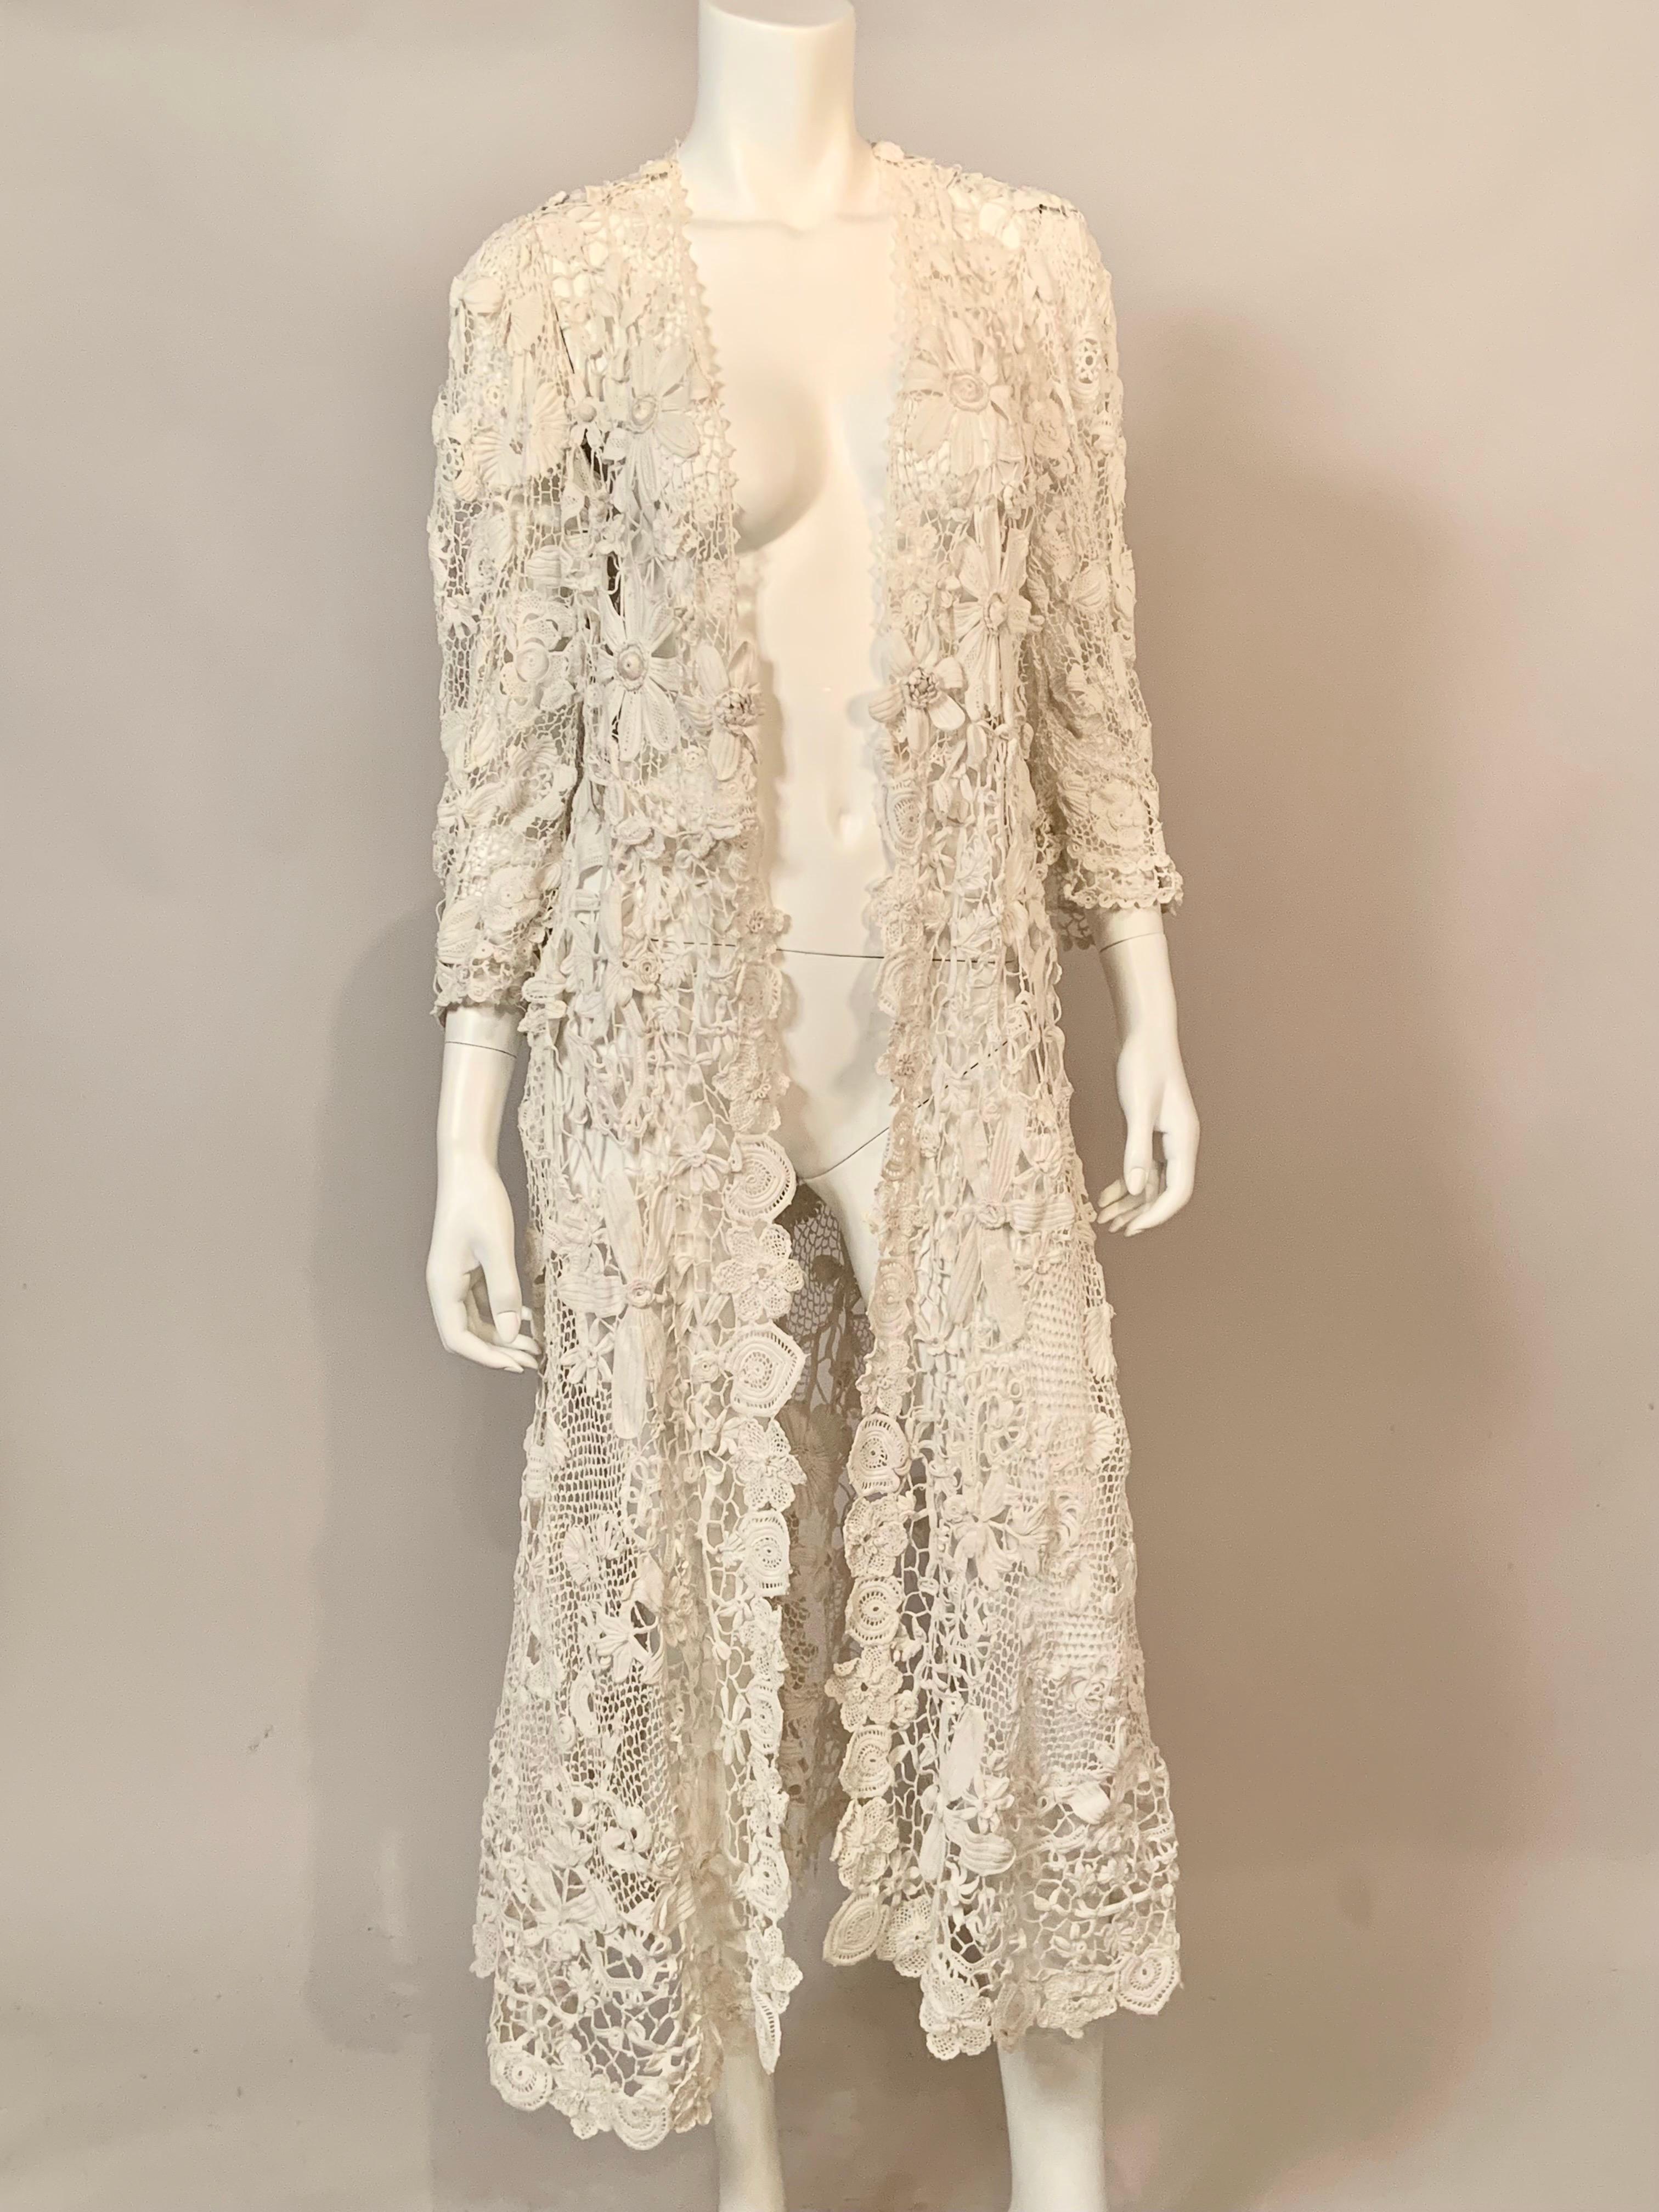 This handmade Irish lace coat has an unusual border pattern of large scale flowers and leaves which runs all the way down the center front and around the hemline. The bodice of the coat, front and back, is also hand made with large motifs.  The body